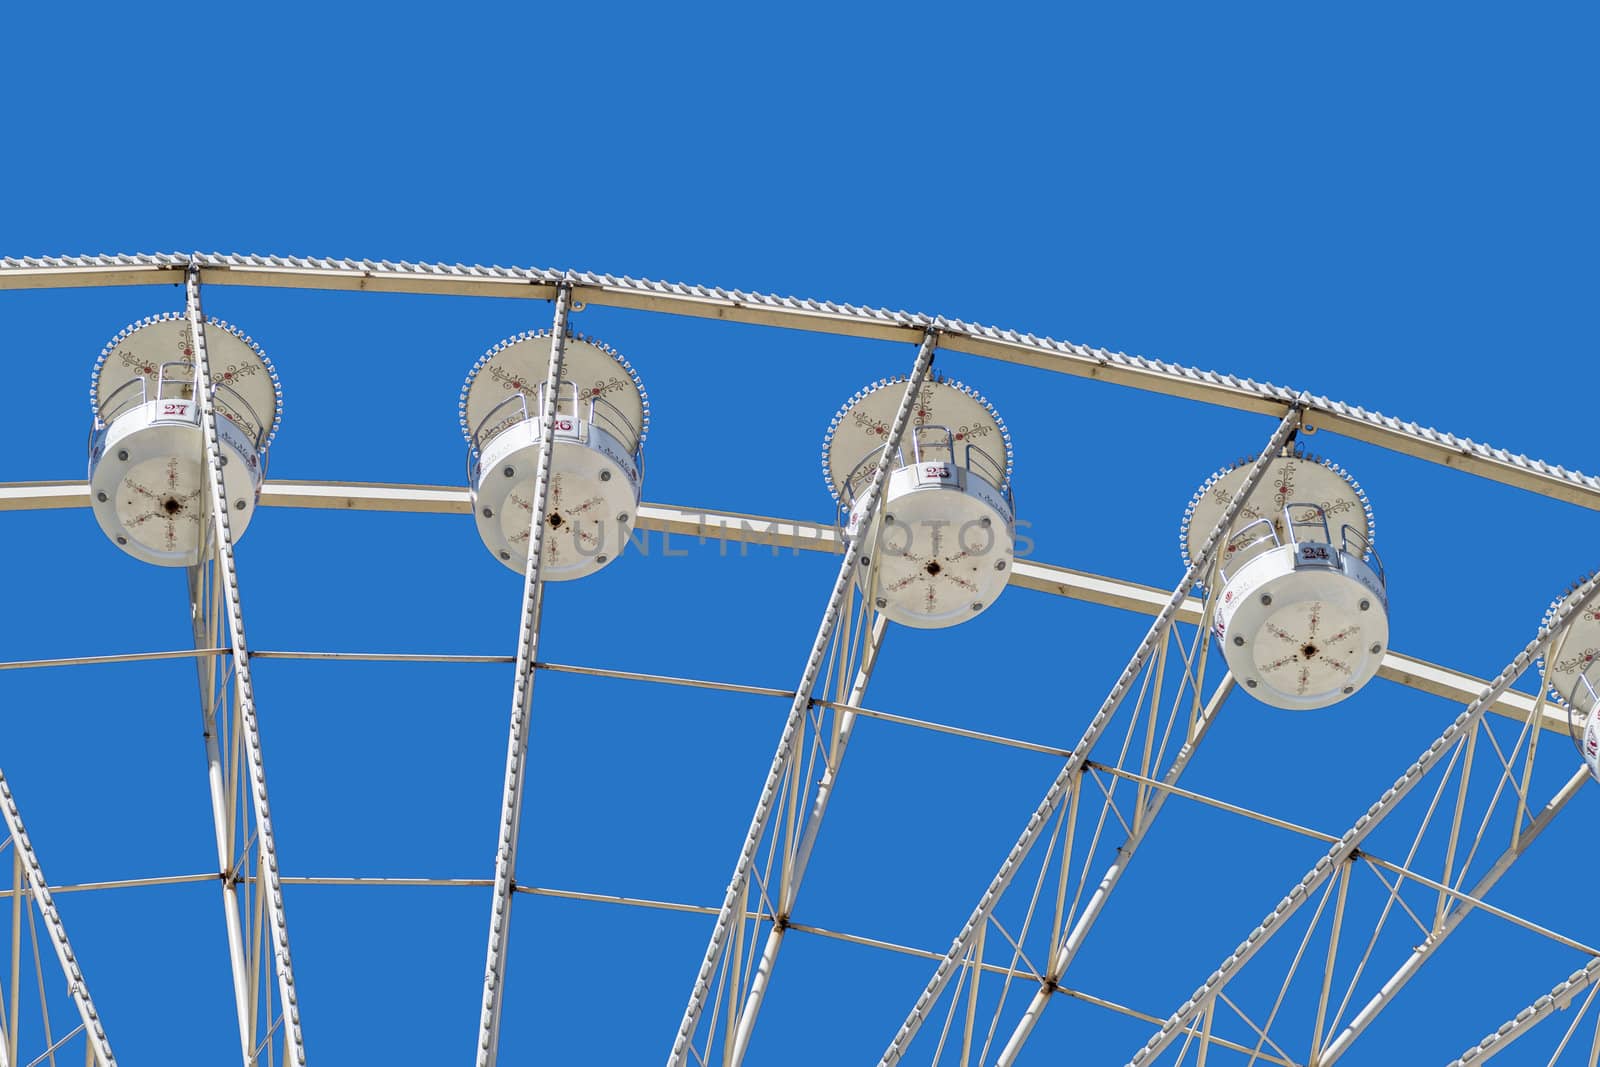 Ferris wheel with white cabins for the passengers, seen from below, at a fairground